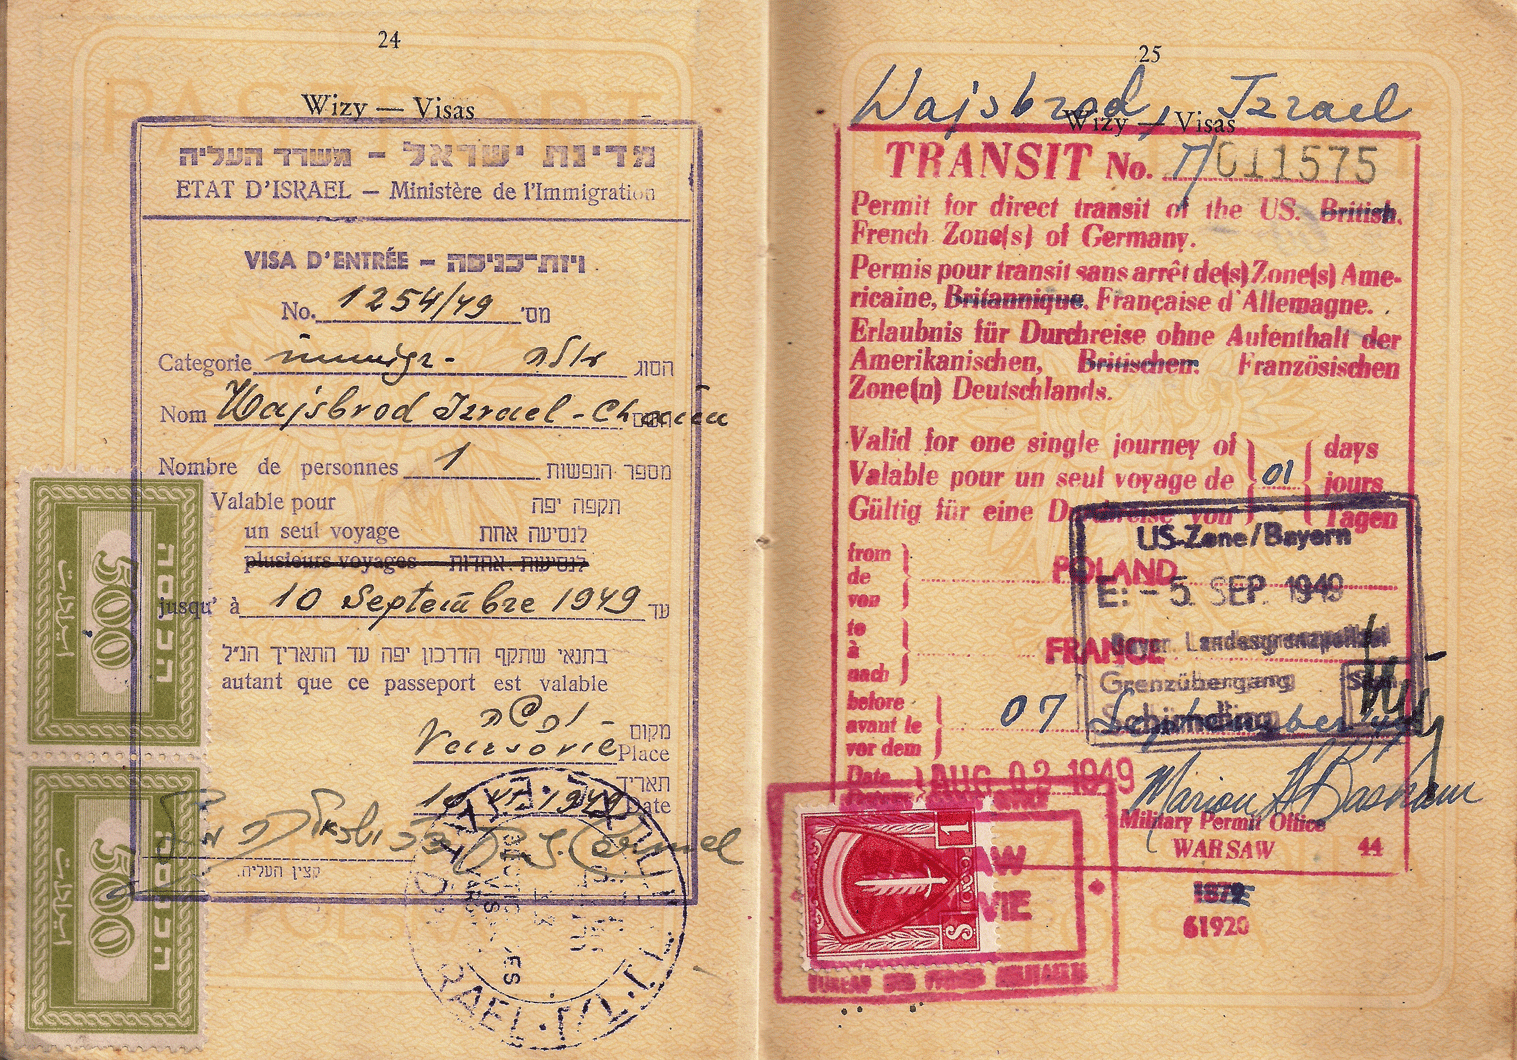 Israel & Allied visas late usage by September 1949